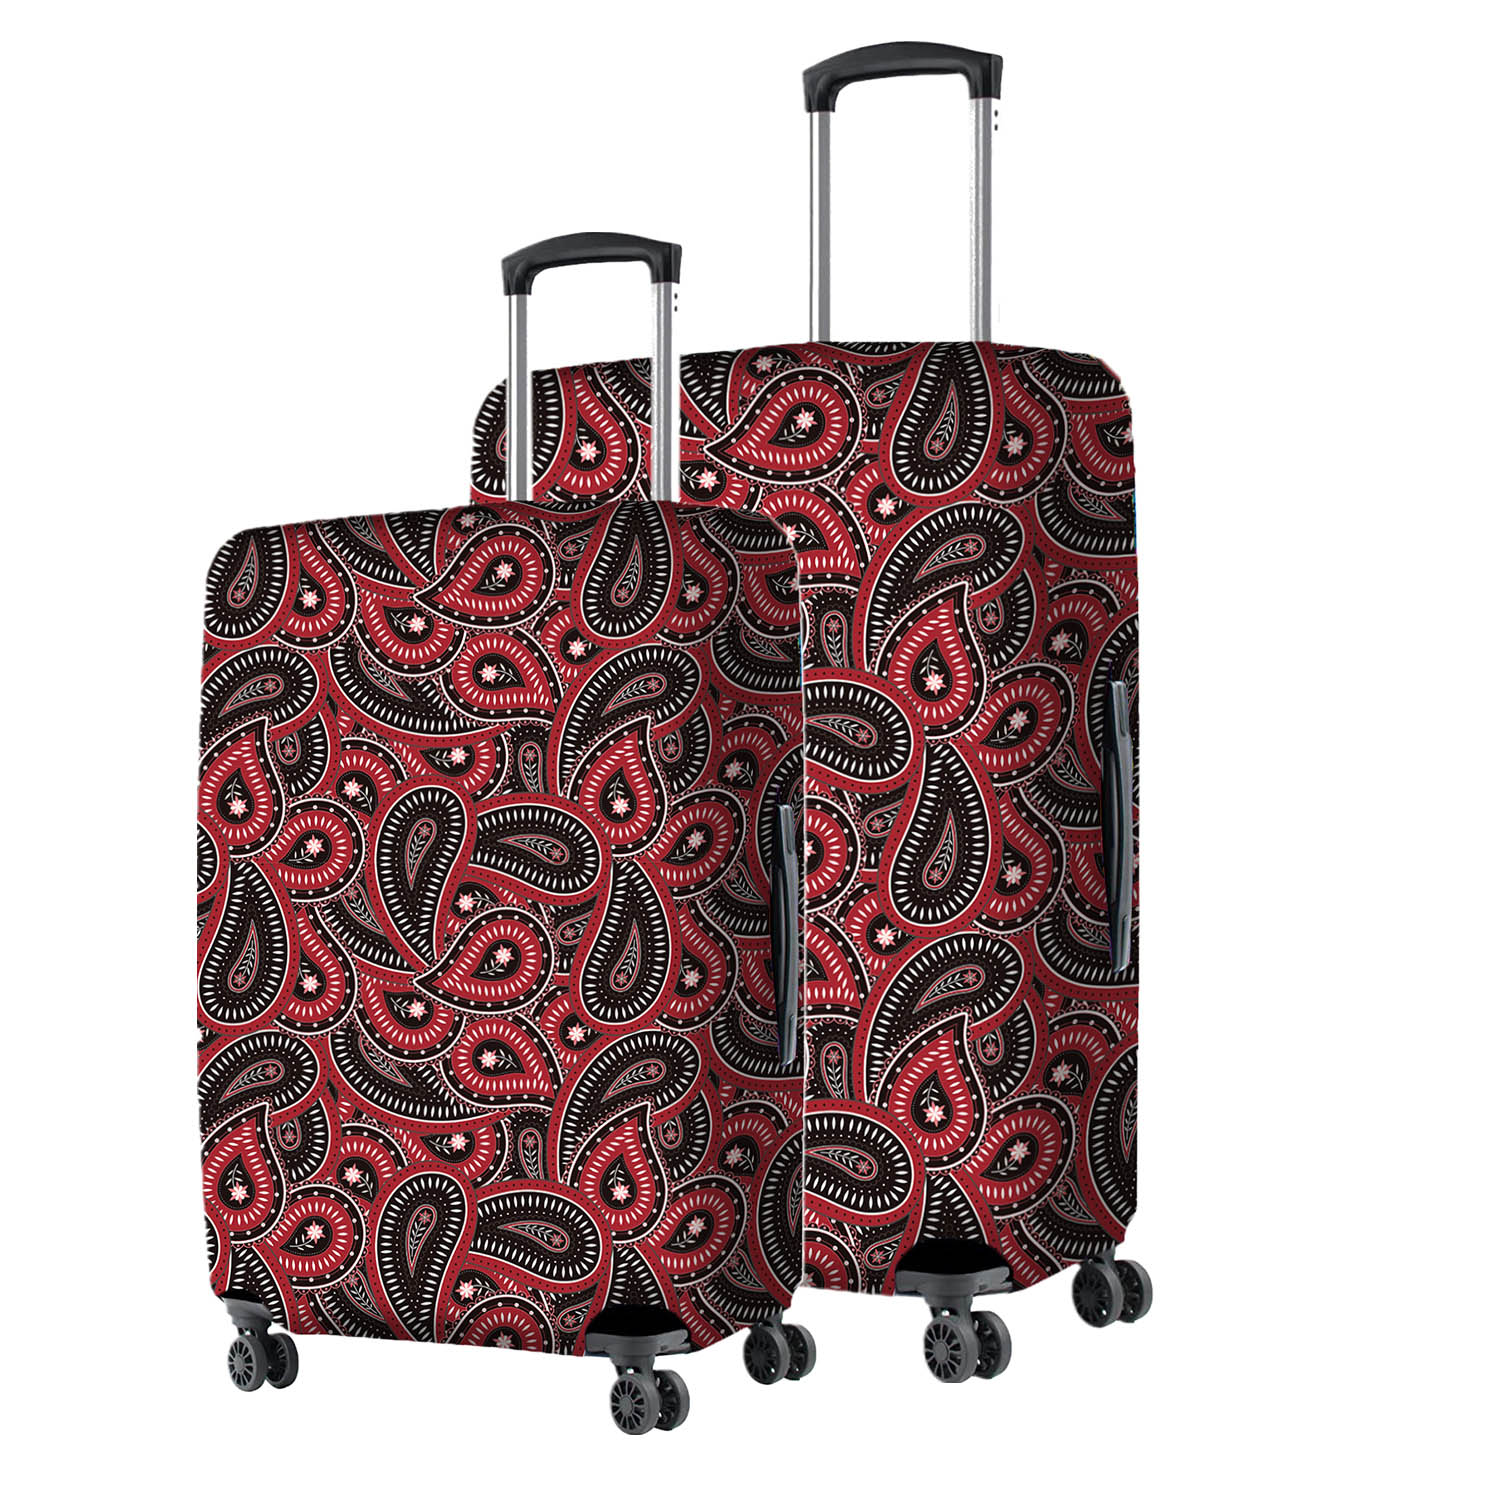 Luggage Cover Maroon Paisley Design